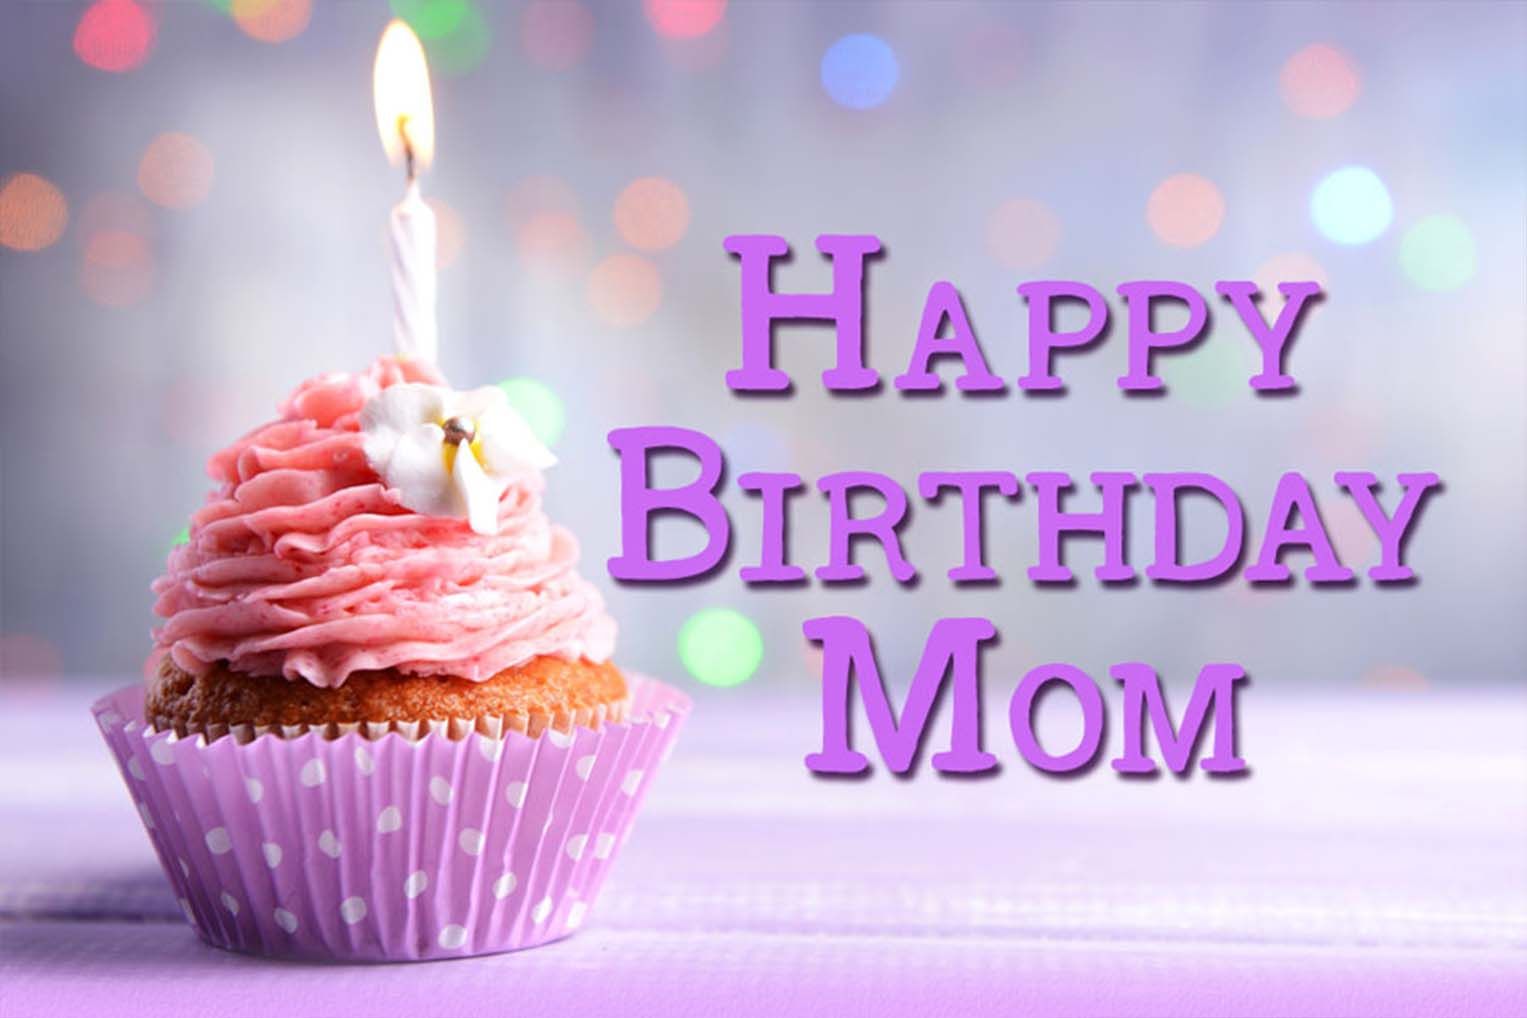 Happy Birthday Mom Quotes, Wishes with Image